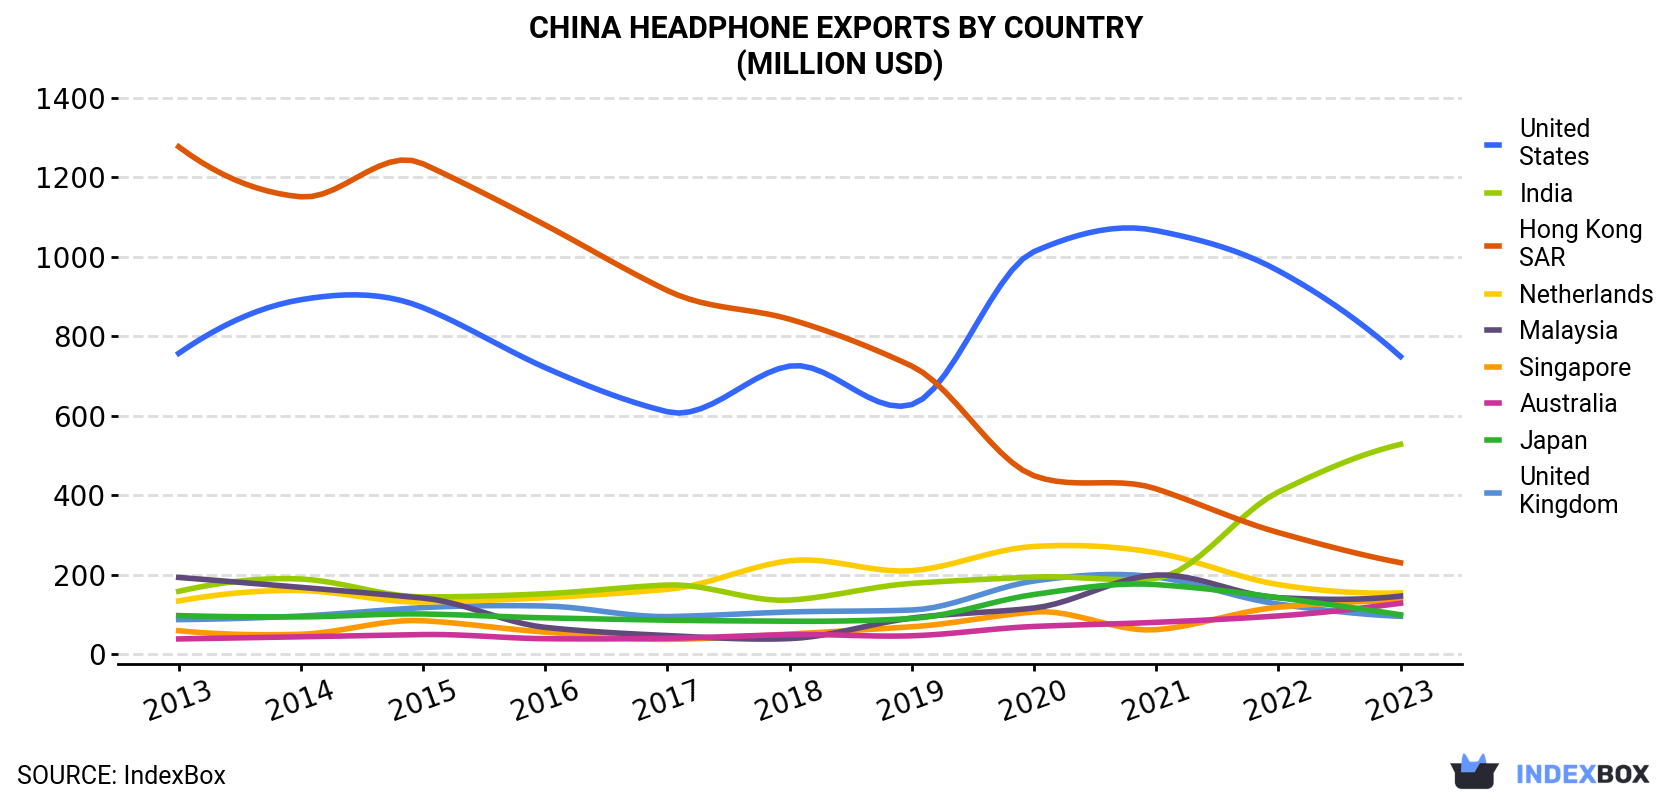 China Headphone Exports By Country (Million USD)